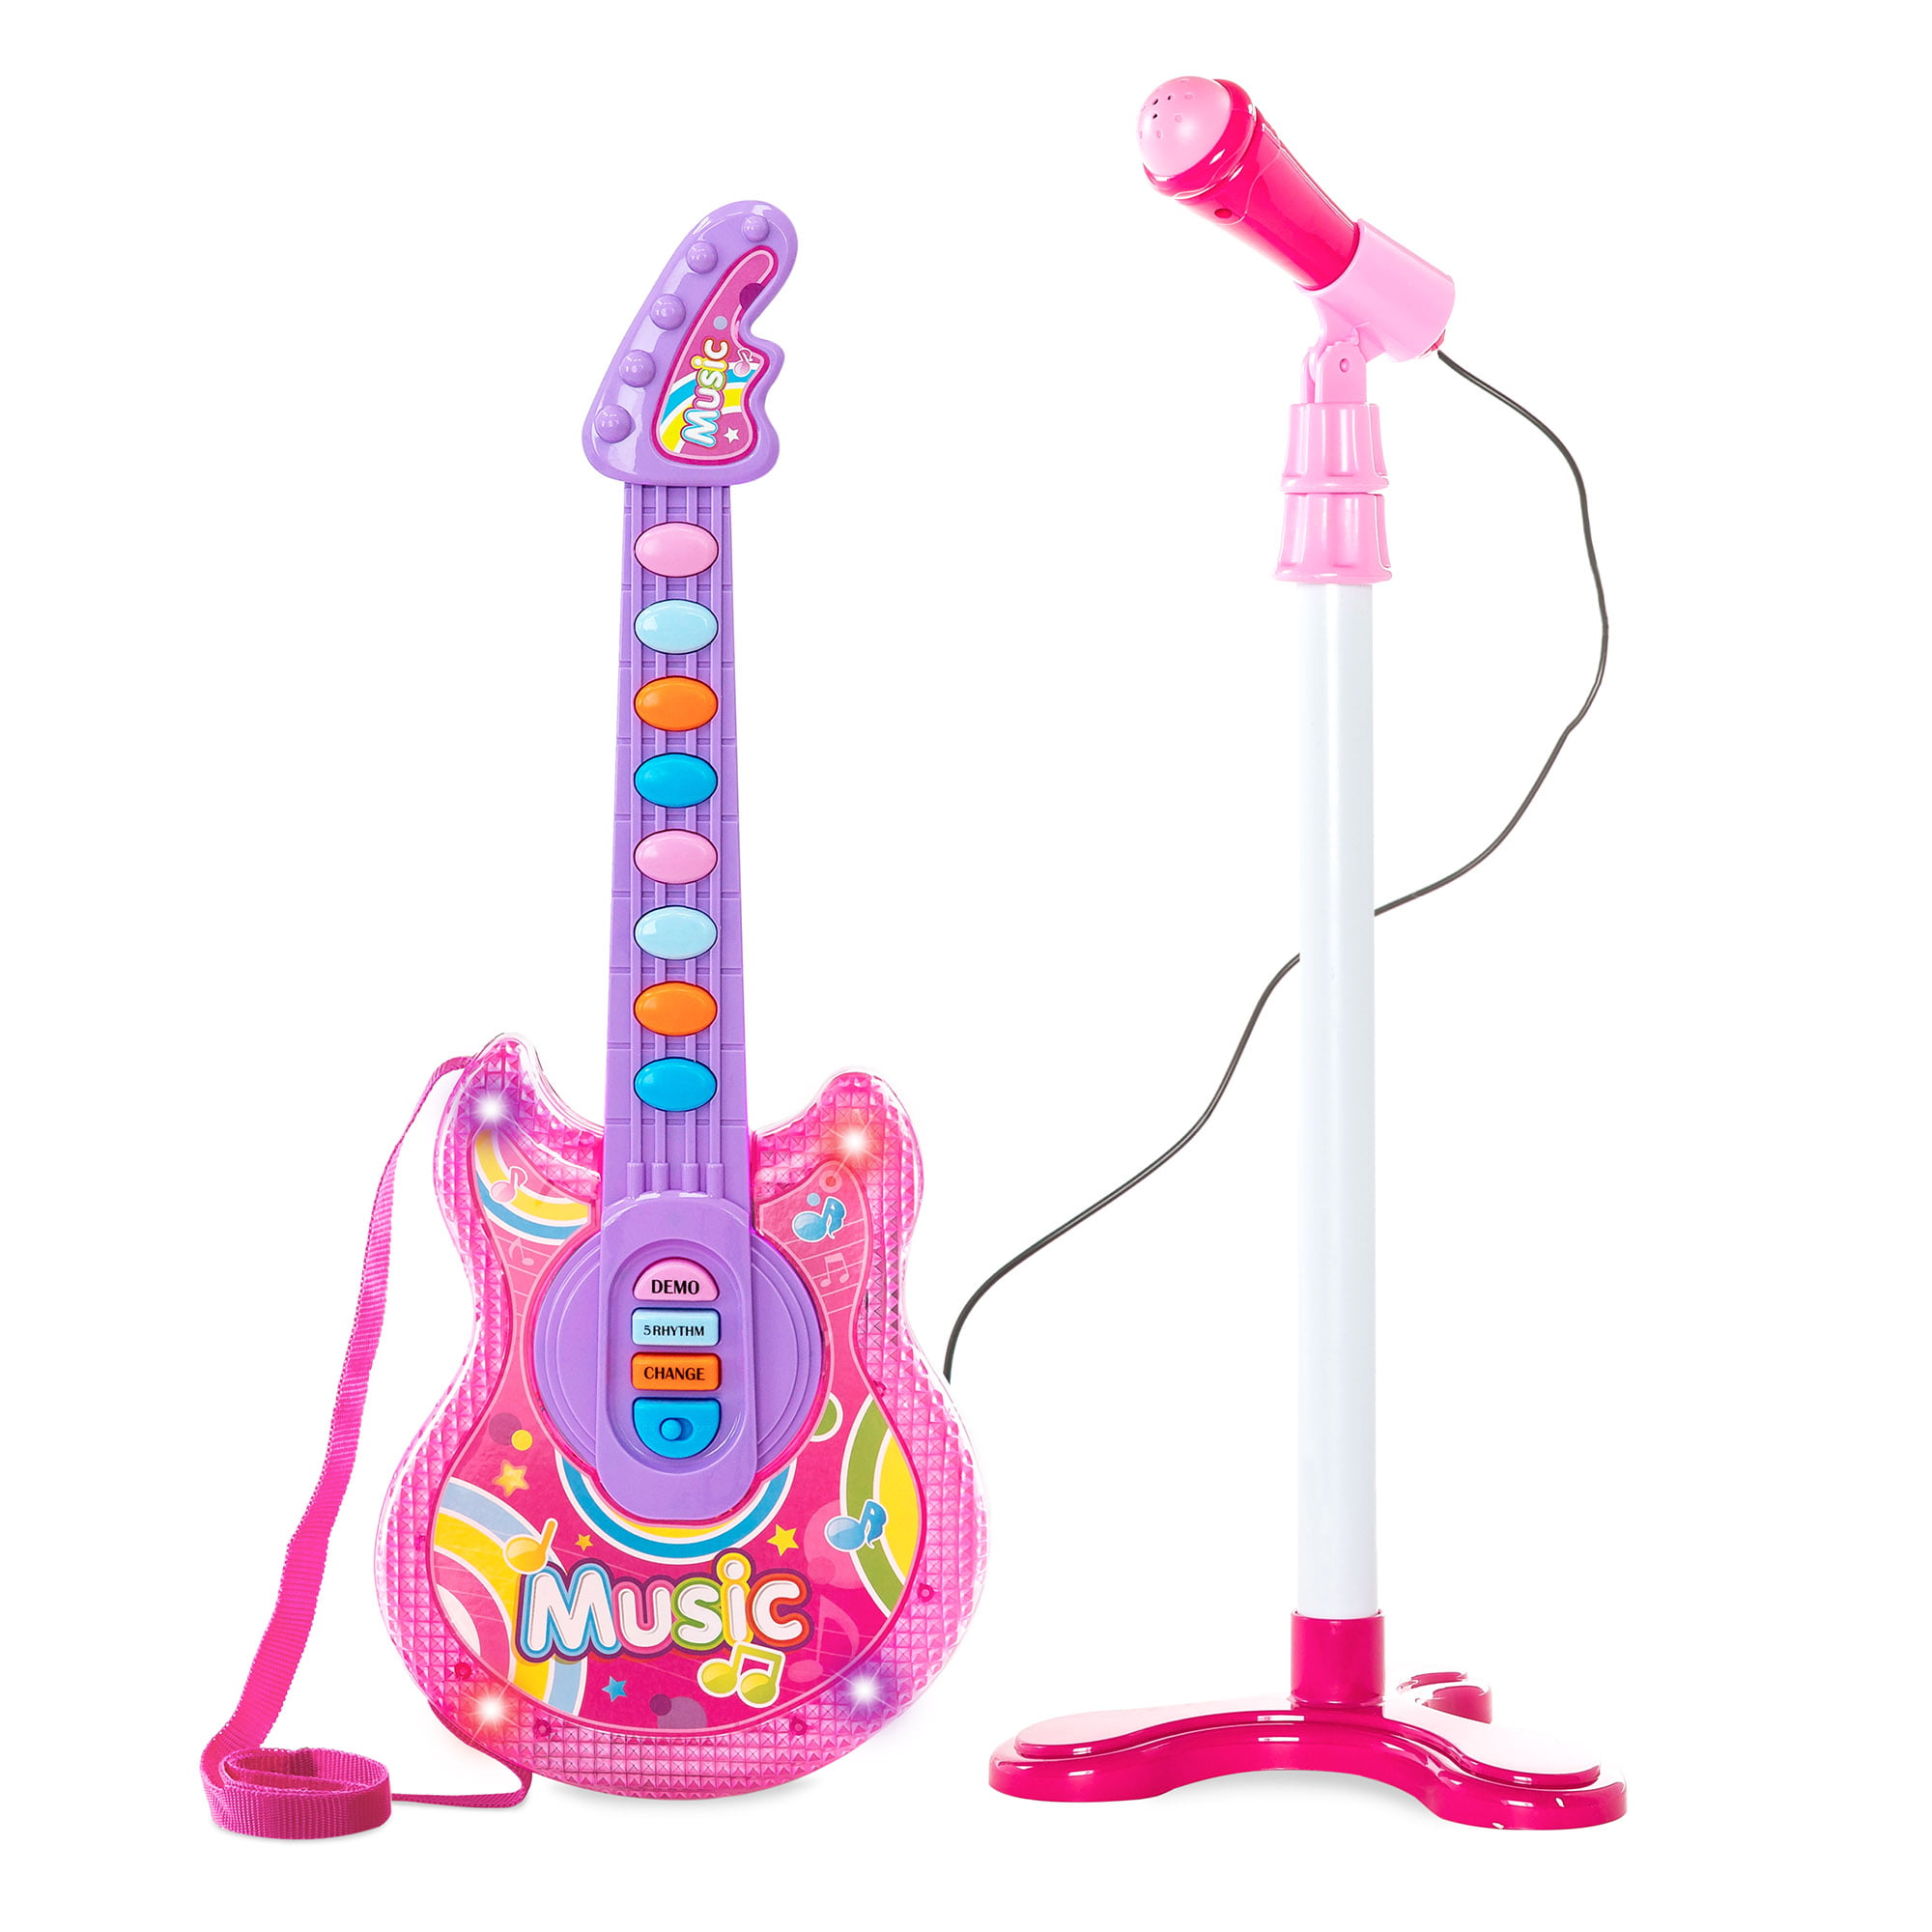 KIDS PINK GUITAR PLAY MUSICAL INSTRUMENT W/D STAGE MICROPHONE ELECTRONIC INDOOR 